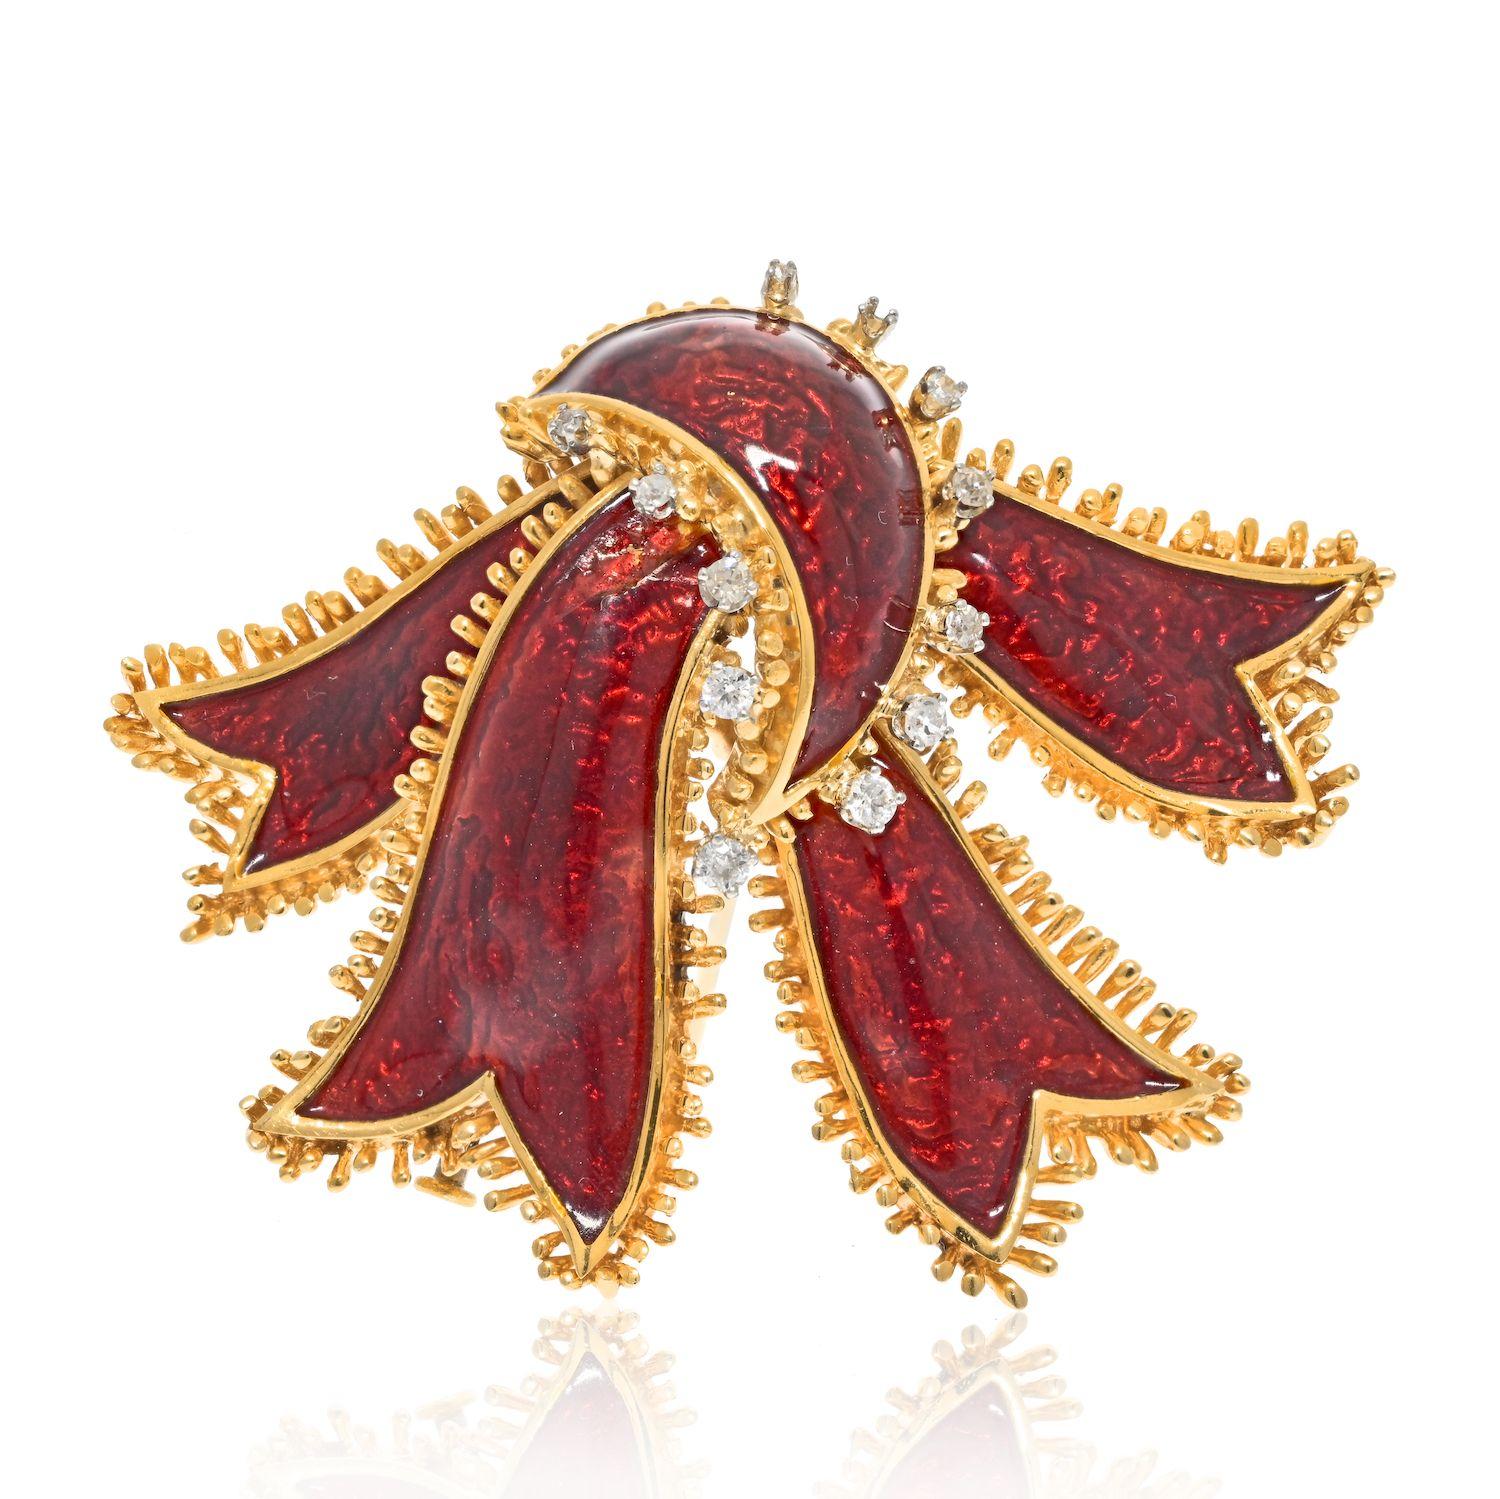 David Webb was a masterful designer of jewelry, creating pieces that are both beautiful and unique. One such piece is his 18k yellow gold brooch fashioned in the shape of a ribbon, applied with vibrant red enamel, and set with just a few round